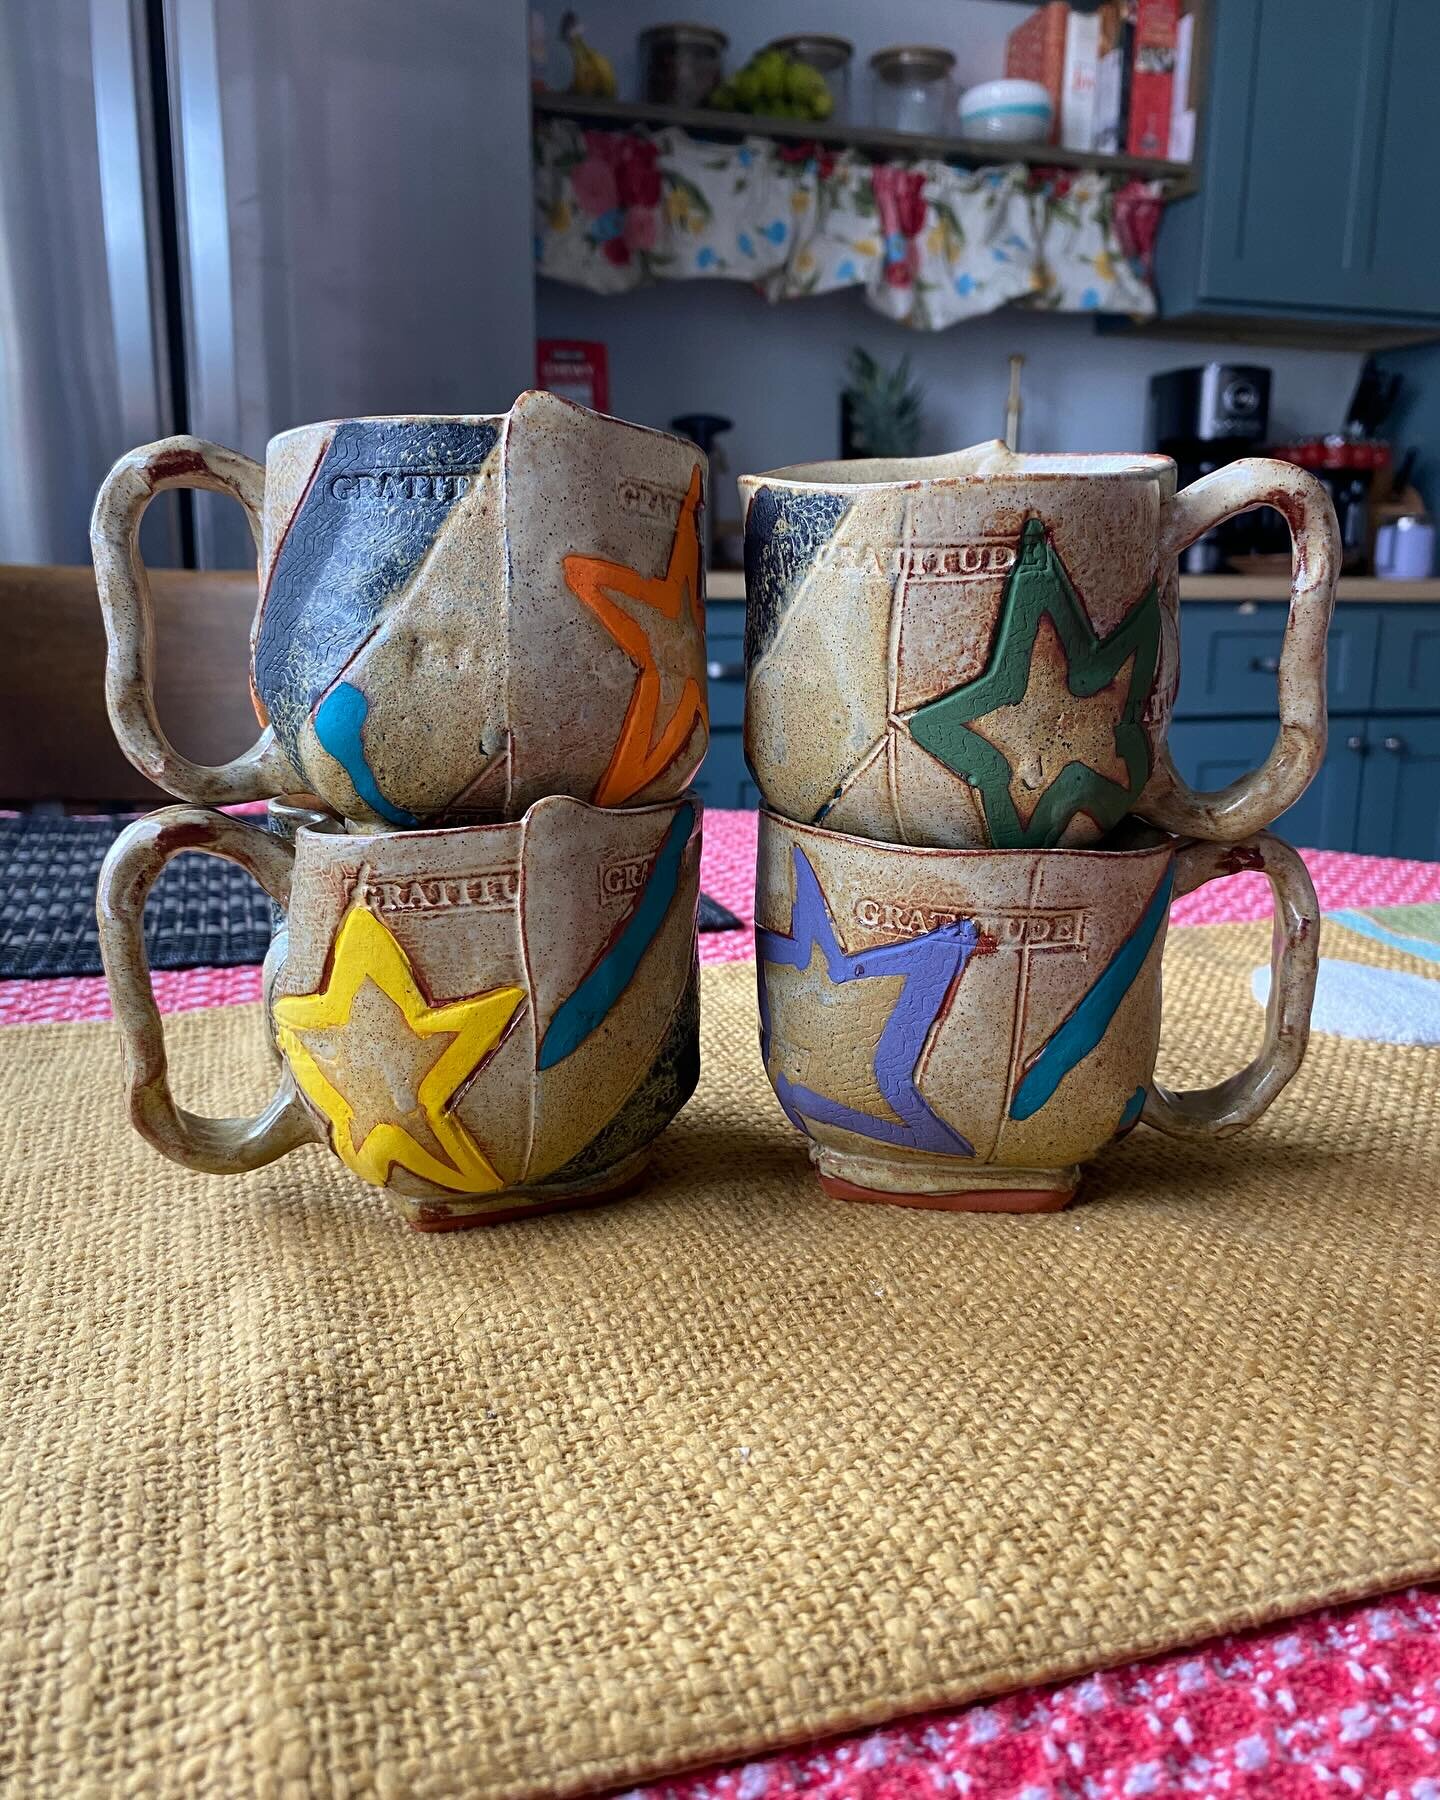 It&rsquo;s a full moon #mugshotmonday over here and we are having a parrrr-tay. 

🌕🌕🌕🌕

This mug set is giving gratitude, it&rsquo;s giving star power, it&rsquo;s giving earth vibes, it&rsquo;s giving all the color feels. 

What a fun commission!